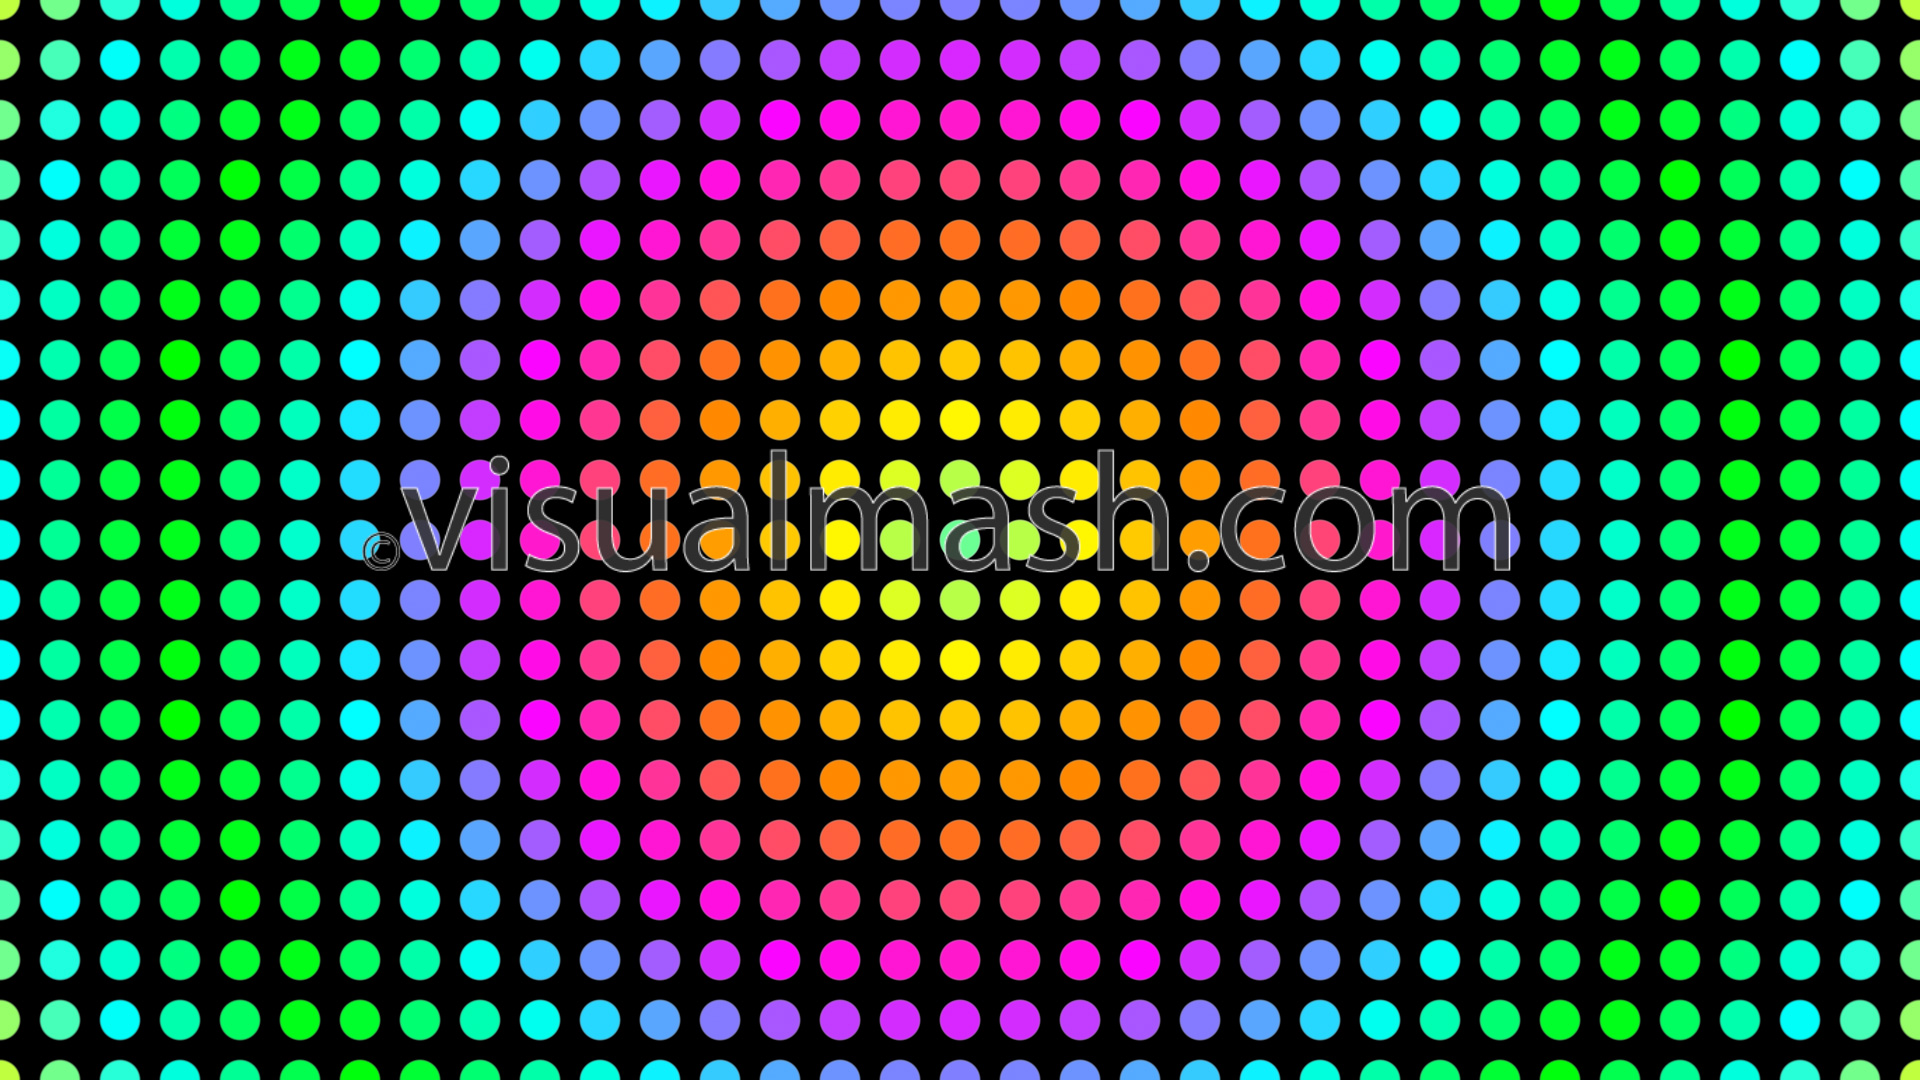 80s Grid Background Retro psychedelic grid dots